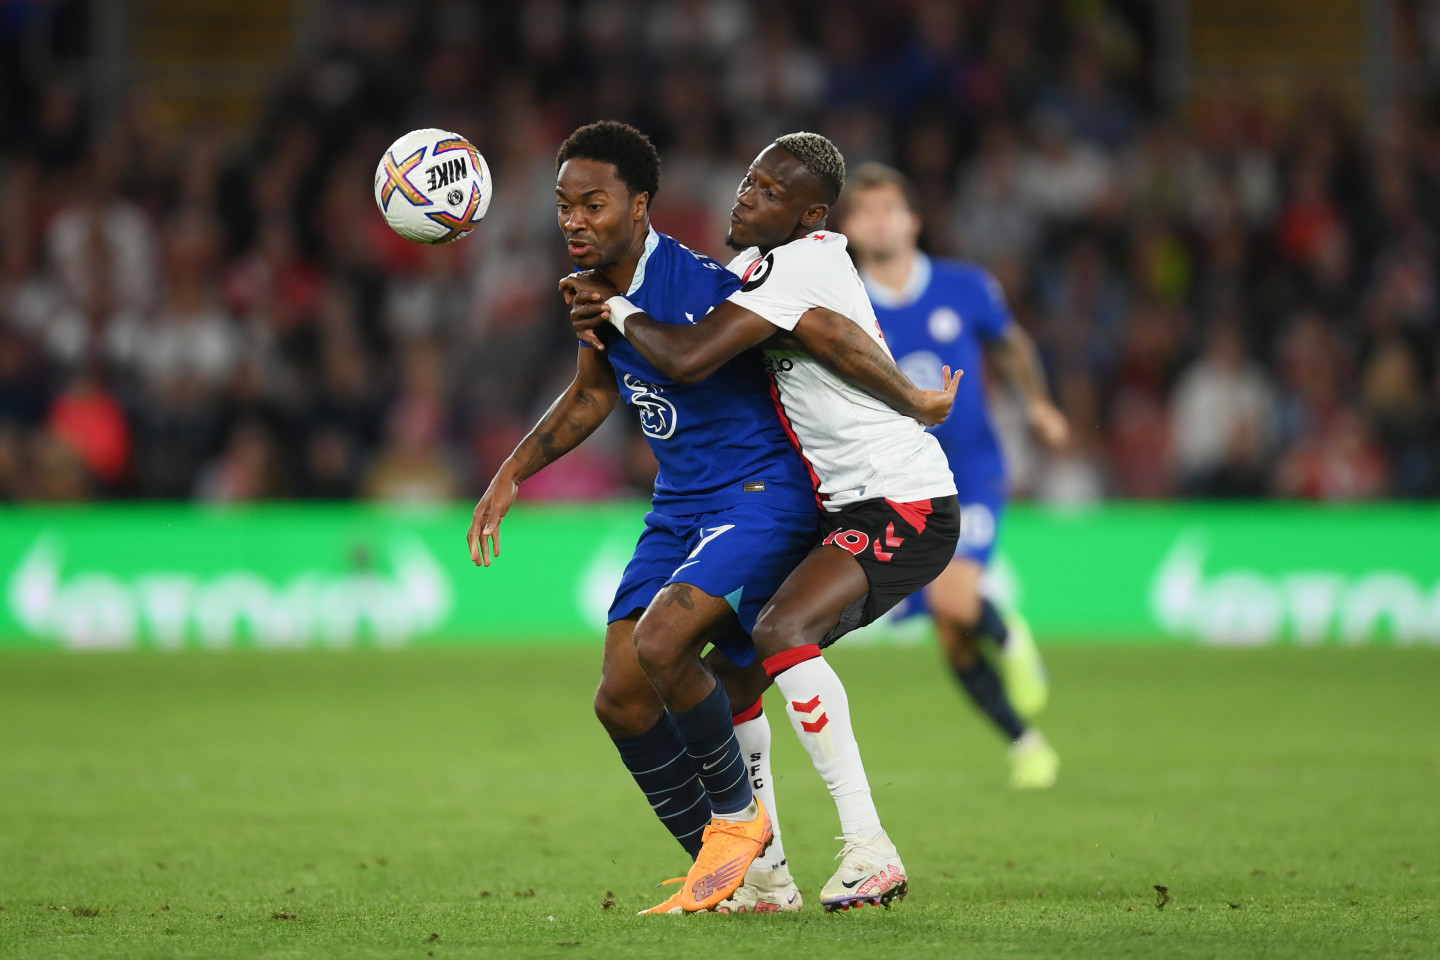 Match report: Southampton Chelsea 1 | News | Official Site | Chelsea Football Club